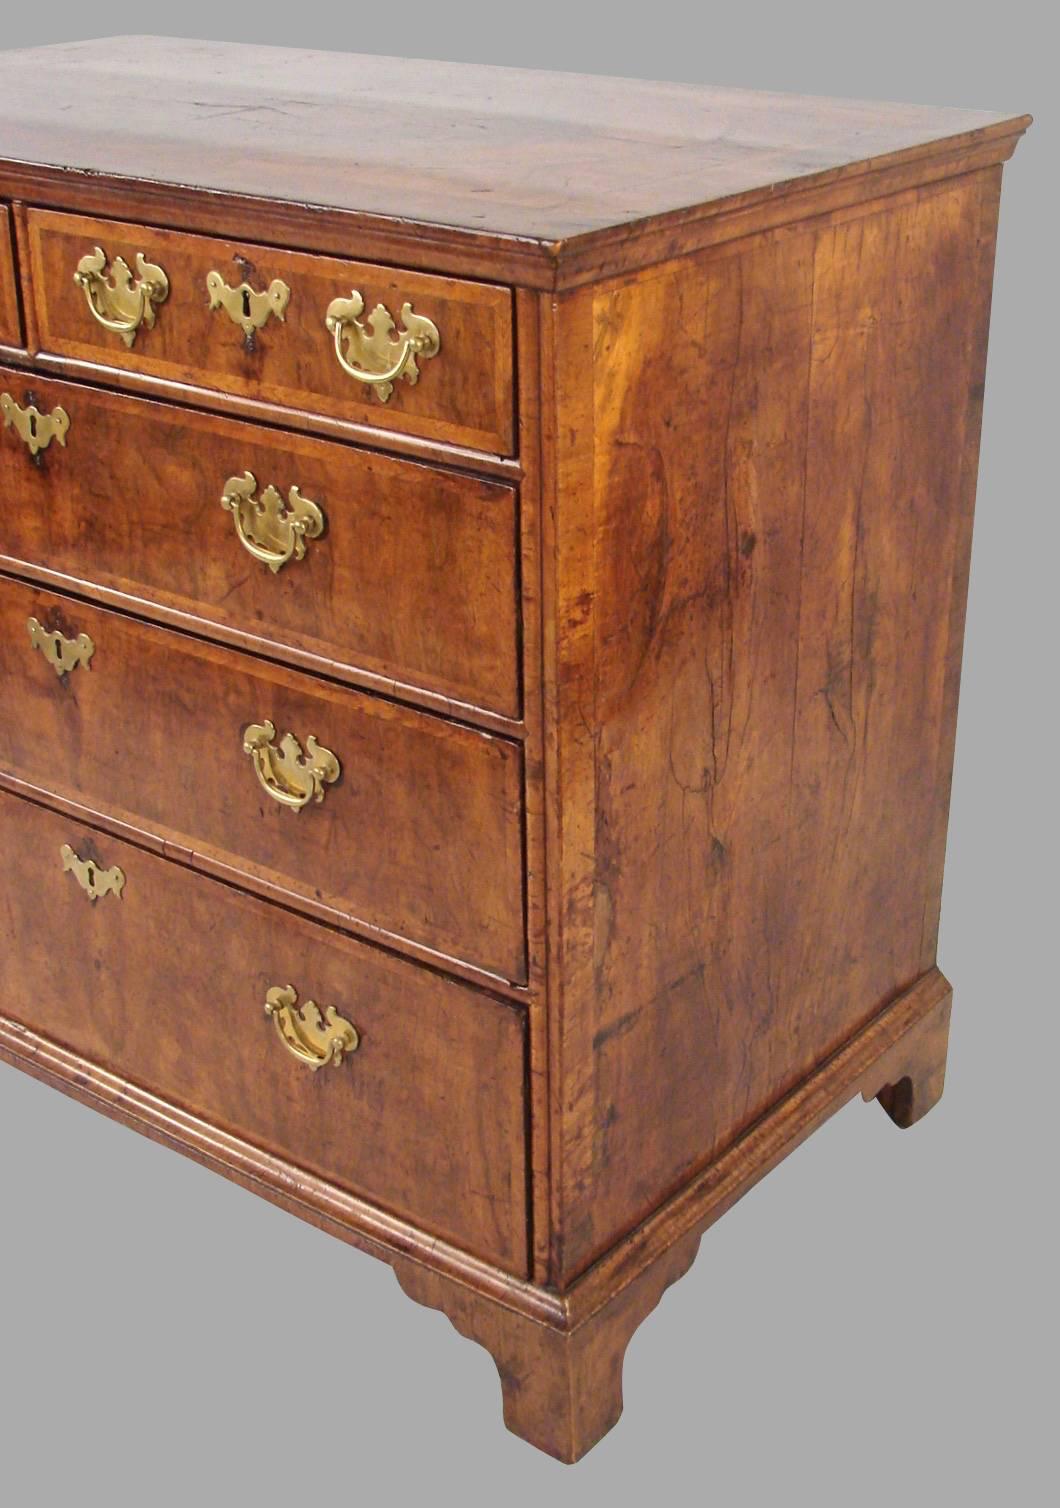 A fine quality George I period inlaid walnut five-drawer chest, the feather-banded top with a beautifully figured walnut inlaid oval central panel over two short and three long drawers, all feather-banded, resting on bracket feet. Both sides